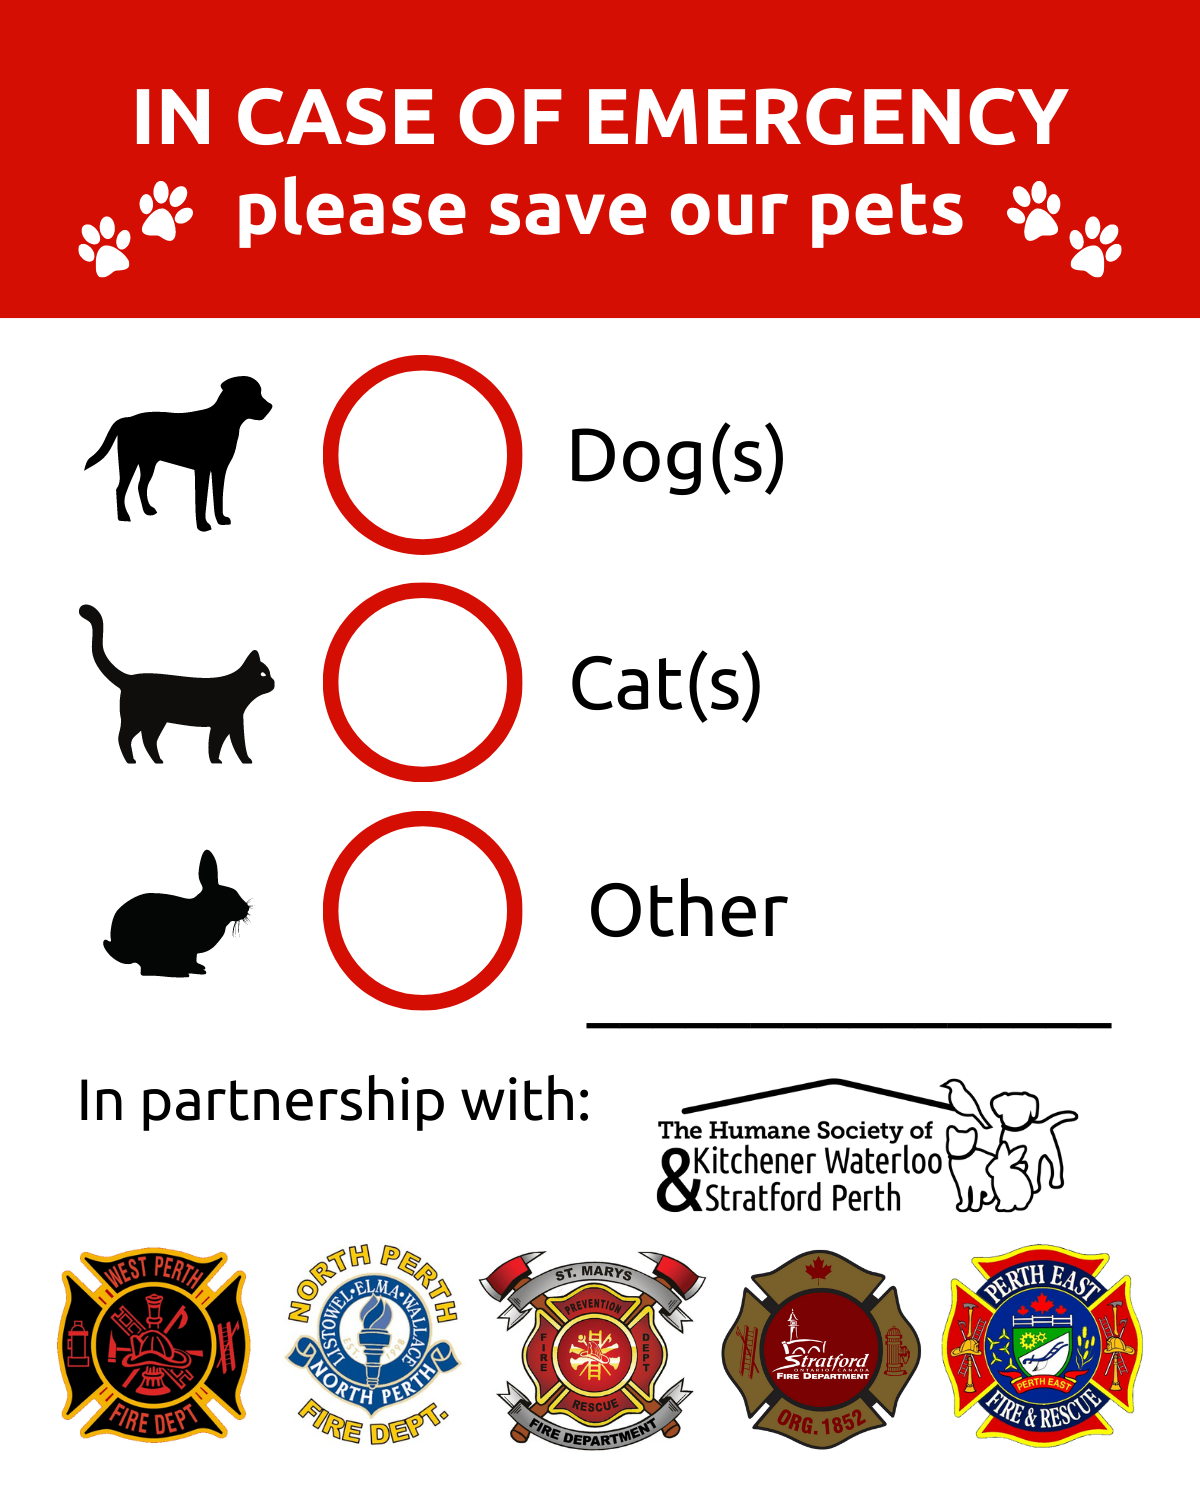 The new emergency pet decal that pet owners can display to help keep their pets safe in the event of an emergency.